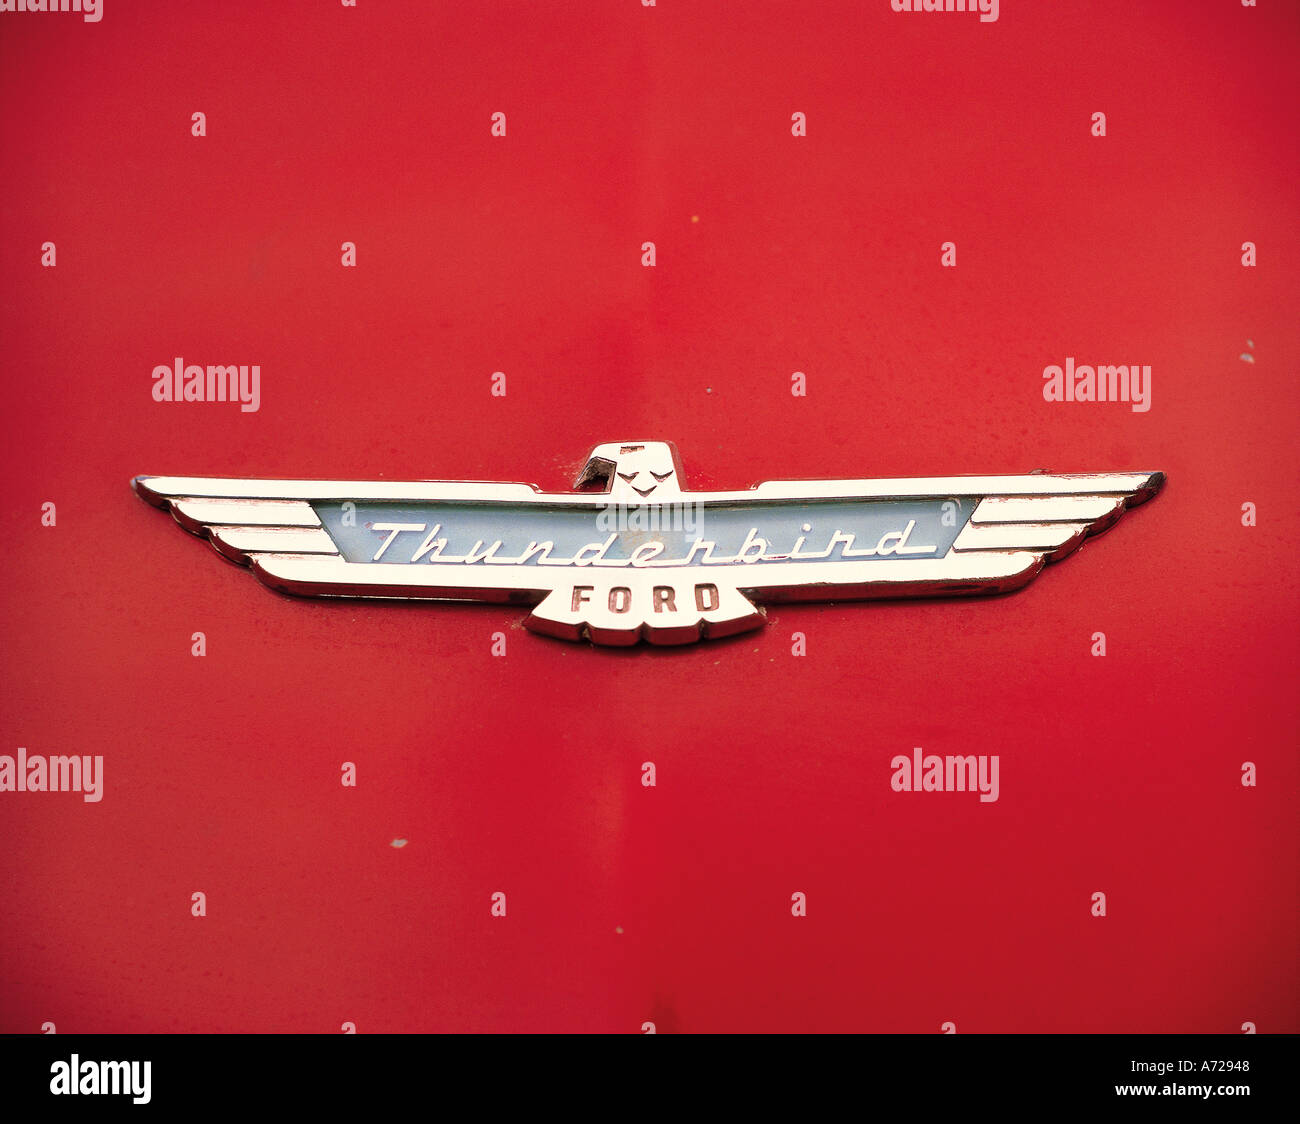 1957 Ford Thunderbird logo in the United States Stock Photo